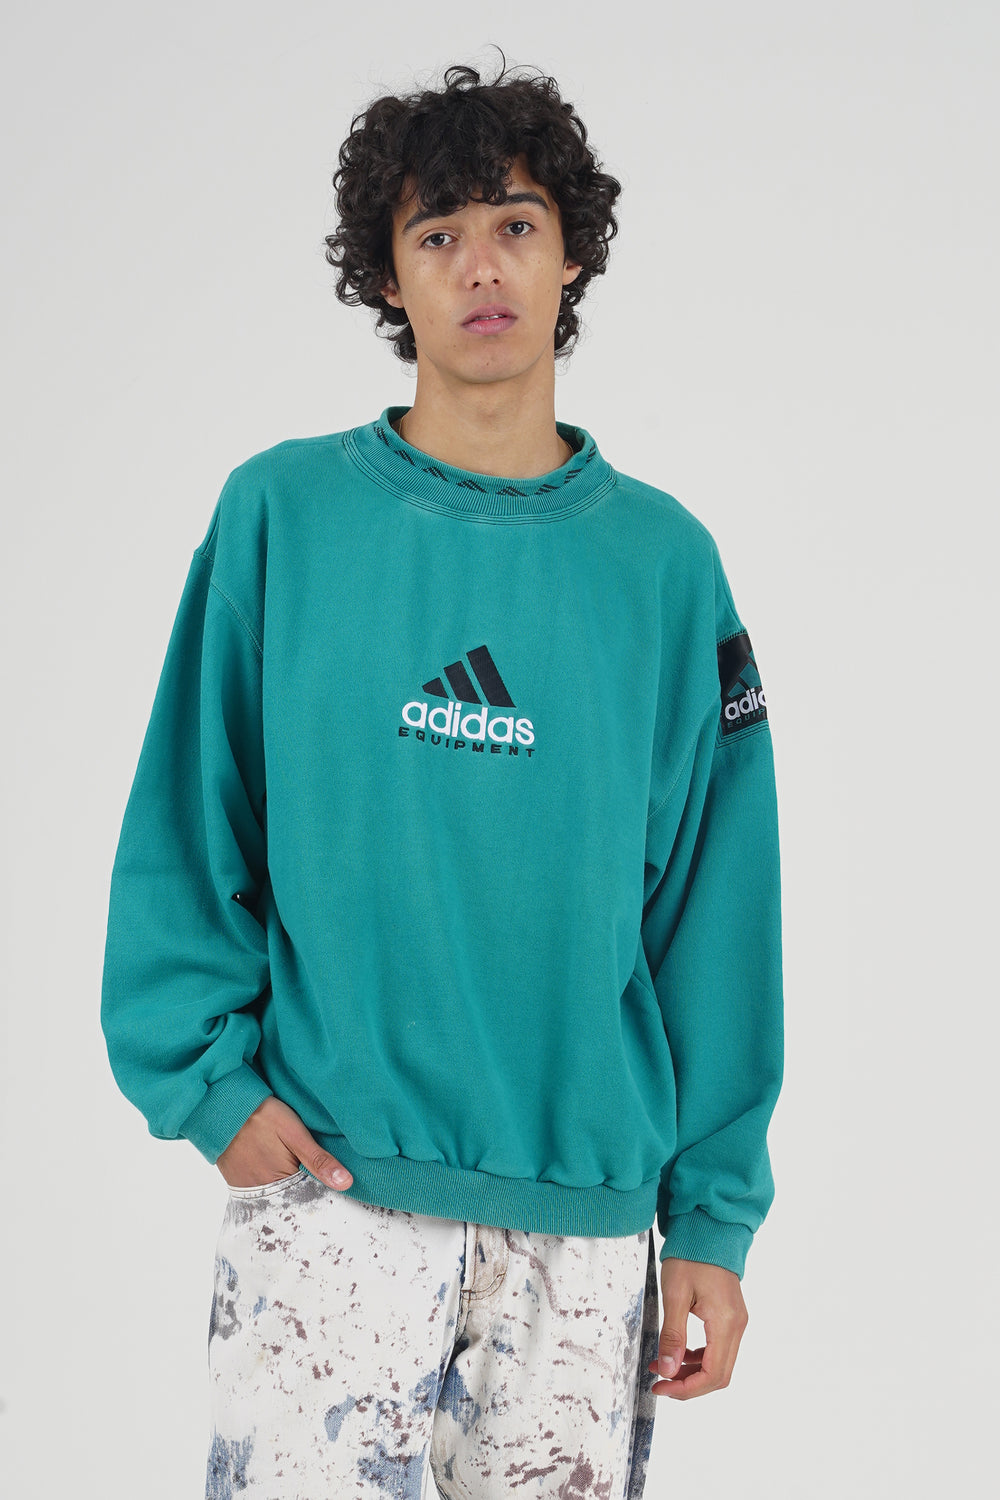 Vintage 90's Adidas Green Teal Logo Sweater | Nordic Poetry